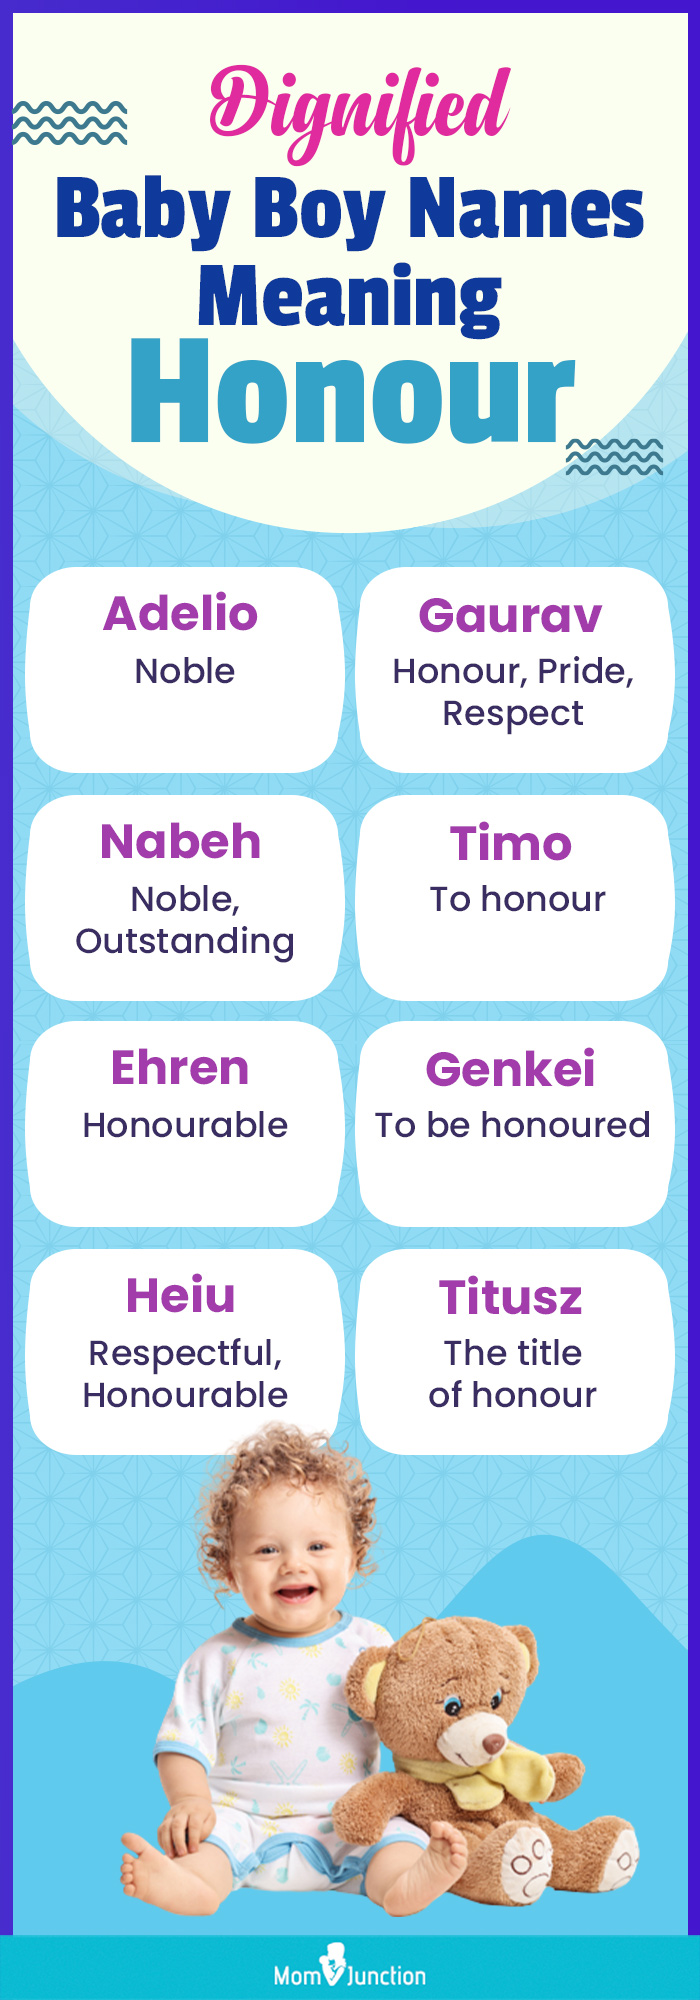 dignified baby boy names meaning honour (infographic)